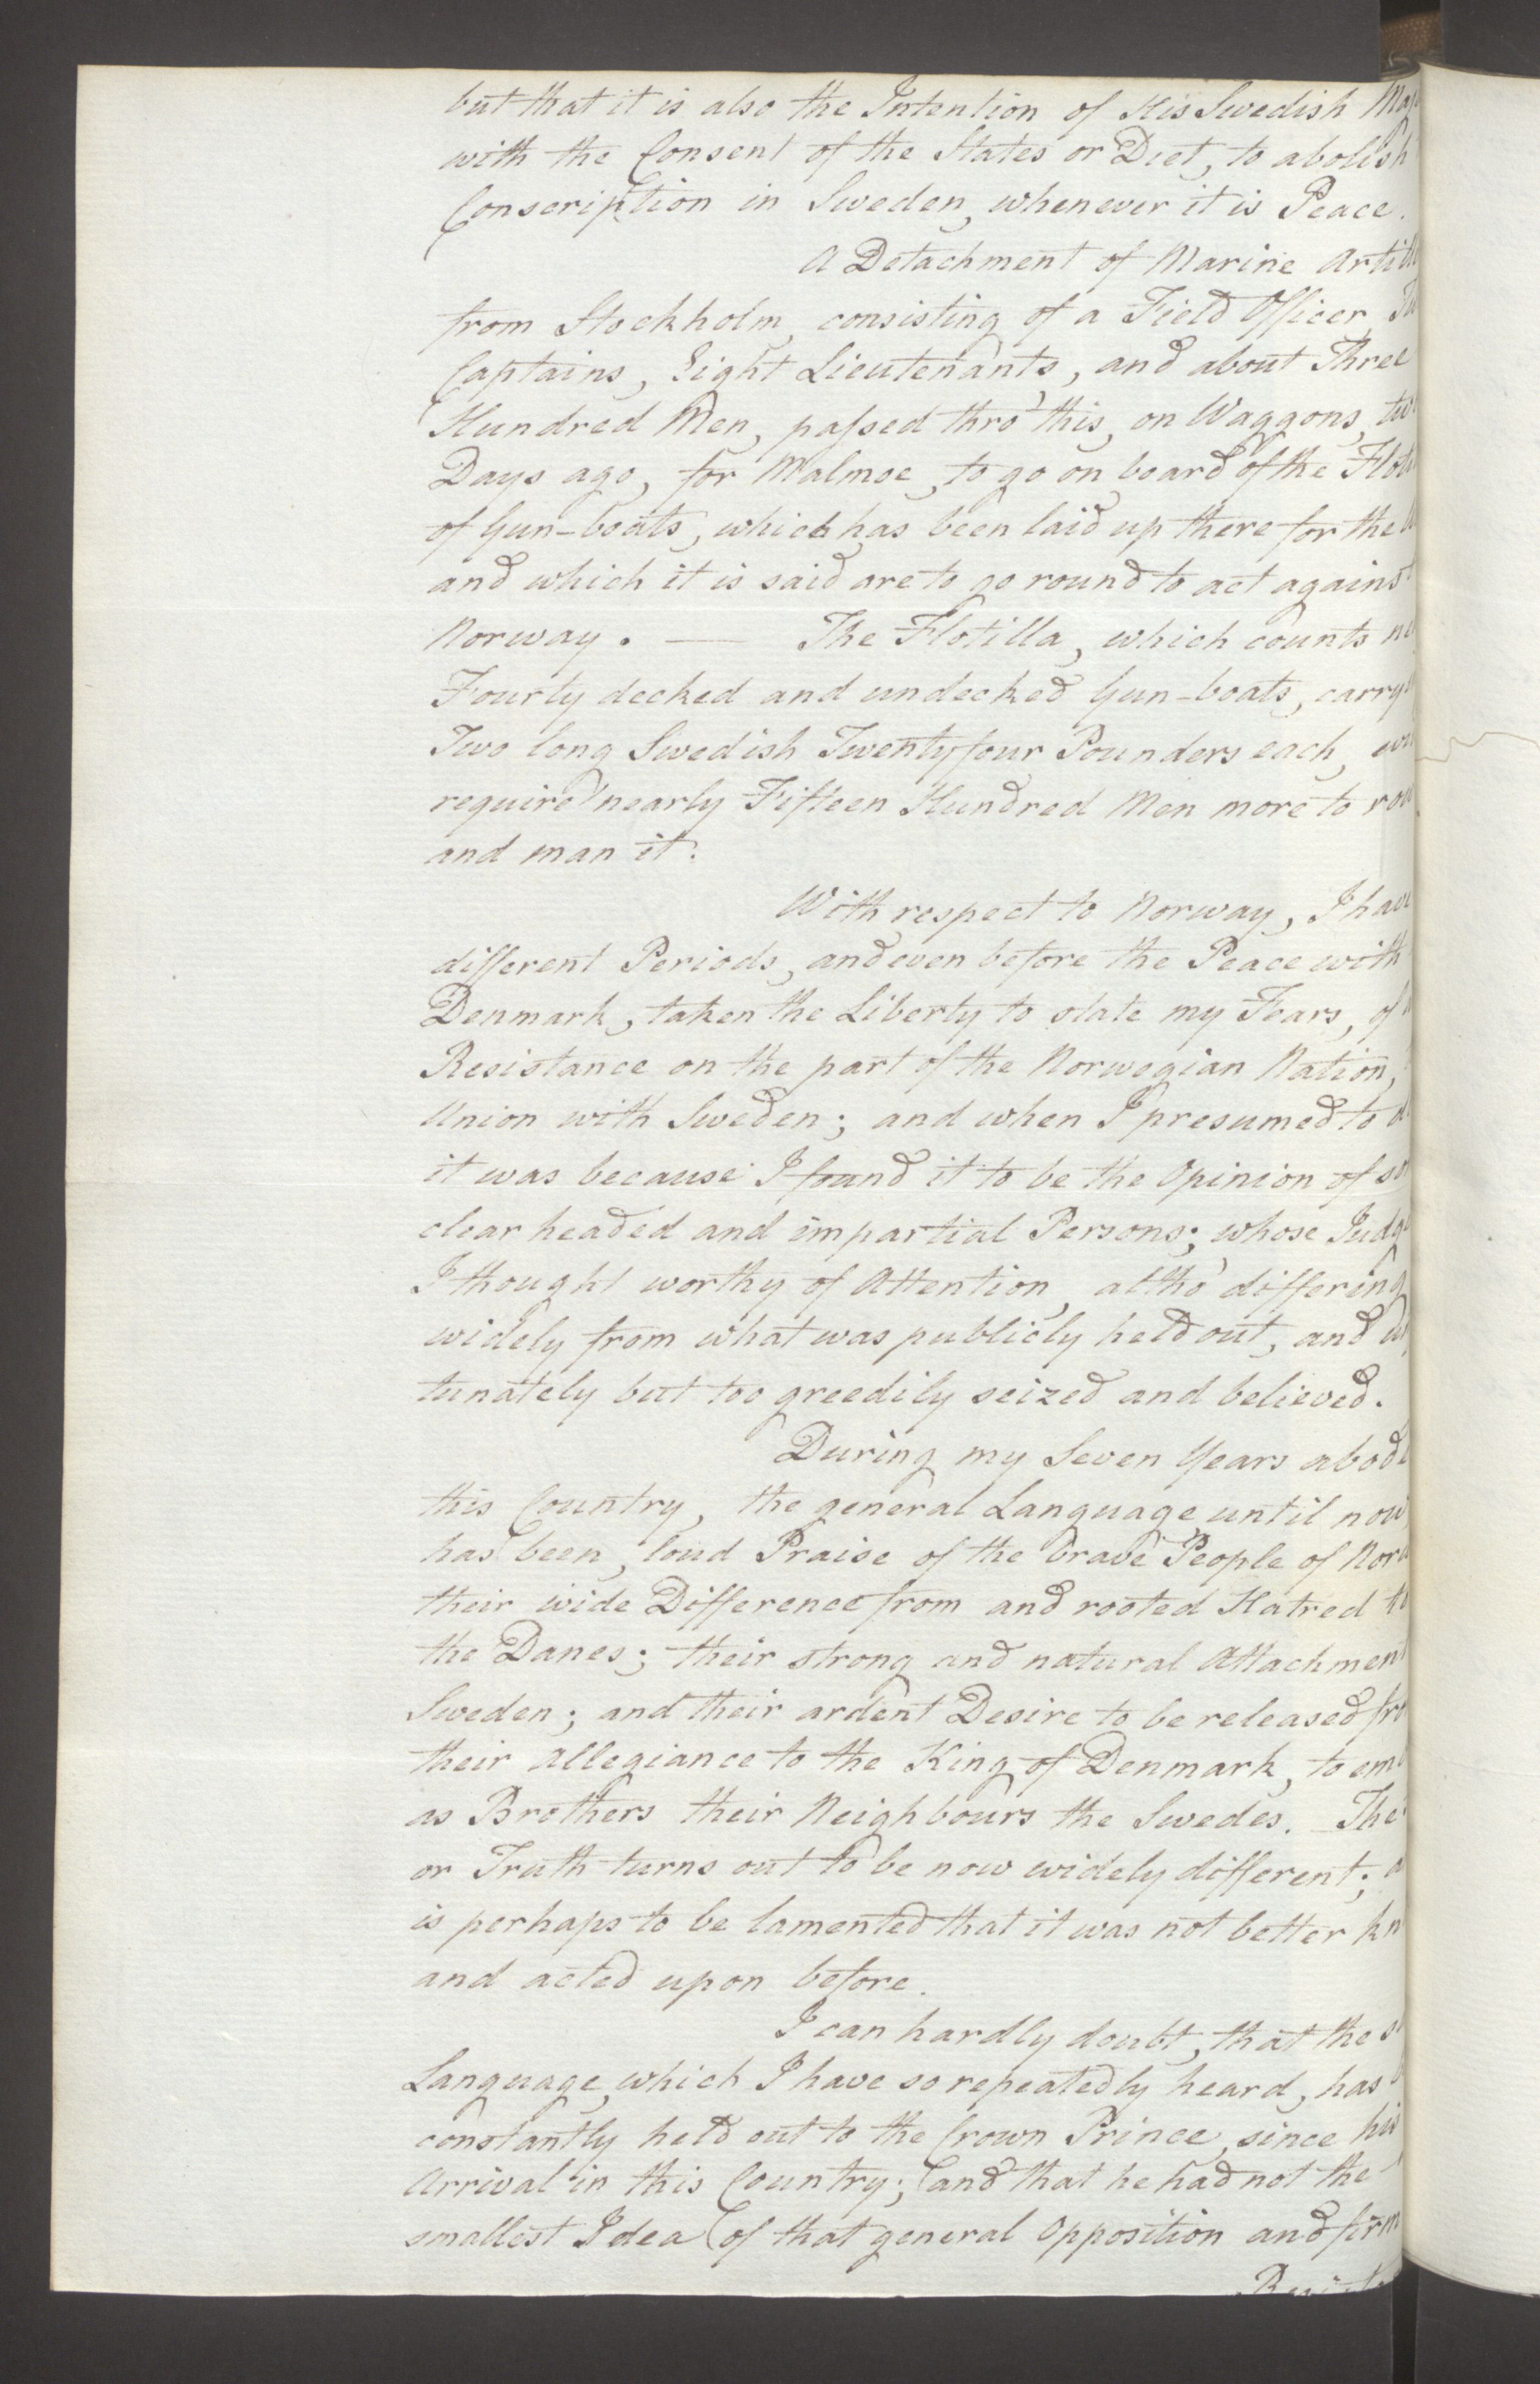 Foreign Office*, UKA/-/FO 38/16: Sir C. Gordon. Reports from Malmö, Jonkoping, and Helsingborg, 1814, p. 39